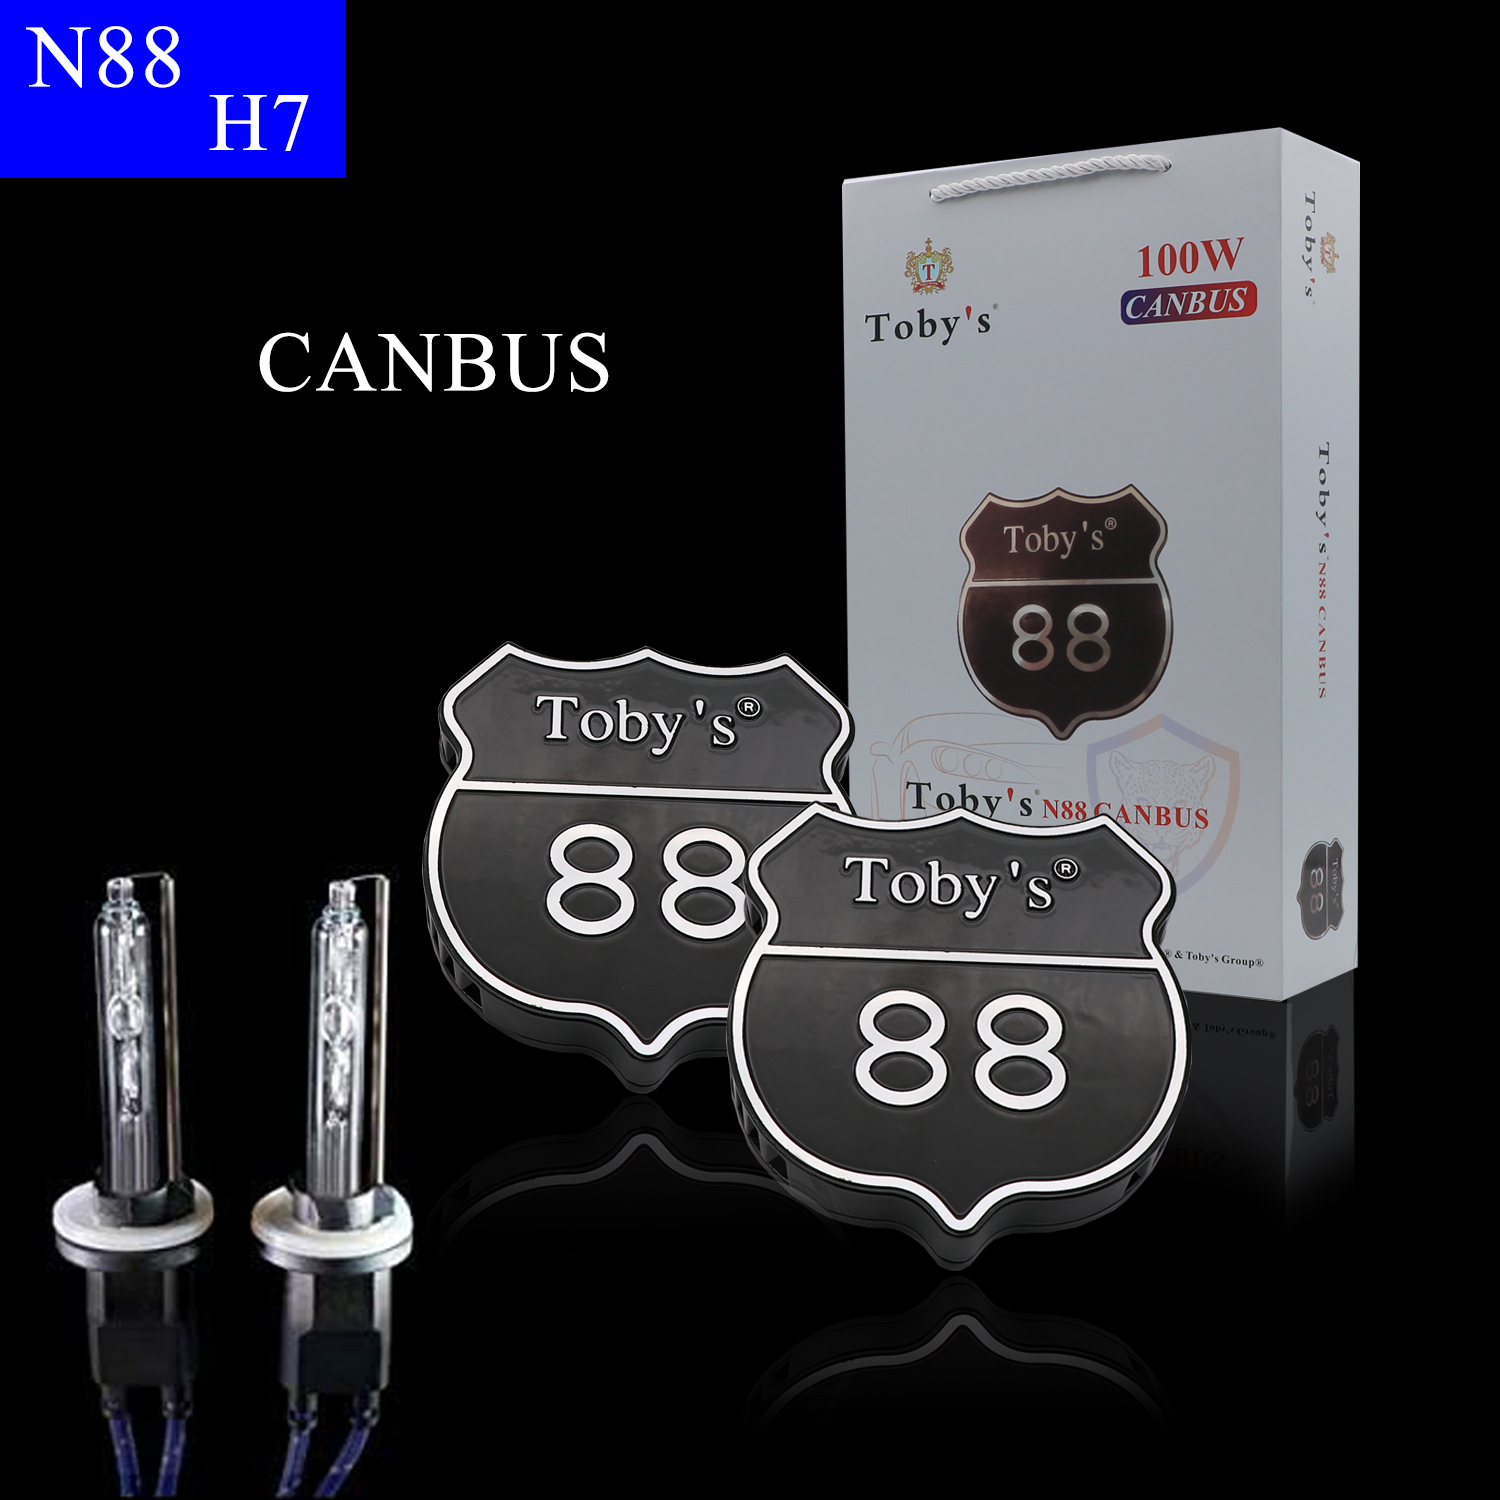 H7 HID Xenon Canbus KIT 100W Best Replacement of Halogen